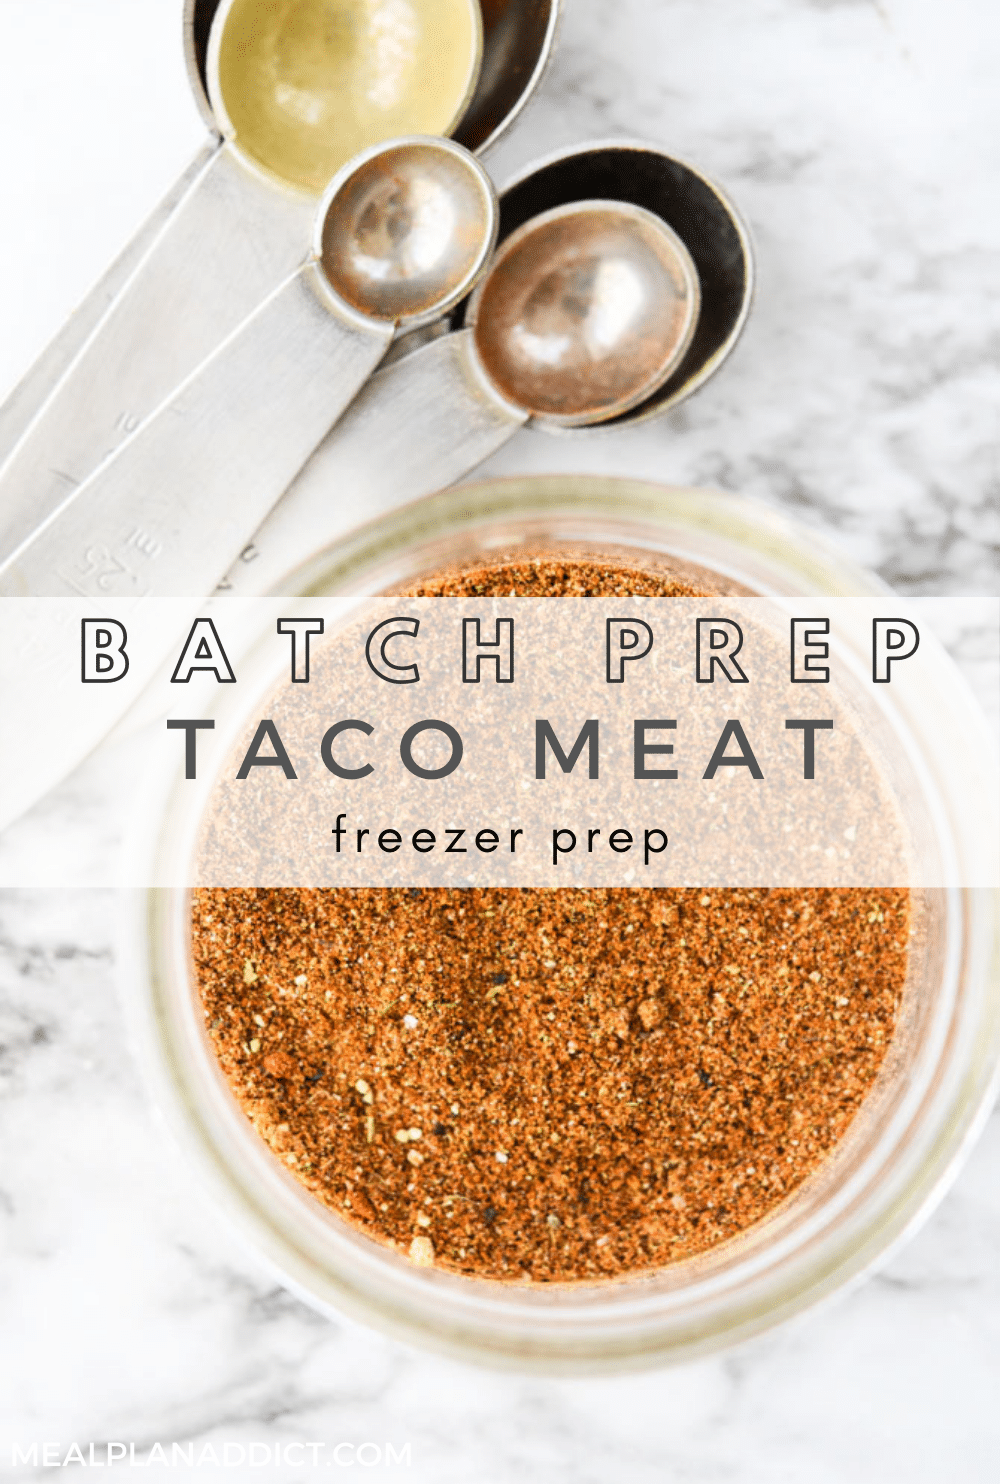 Taco meat pin for Pinterest